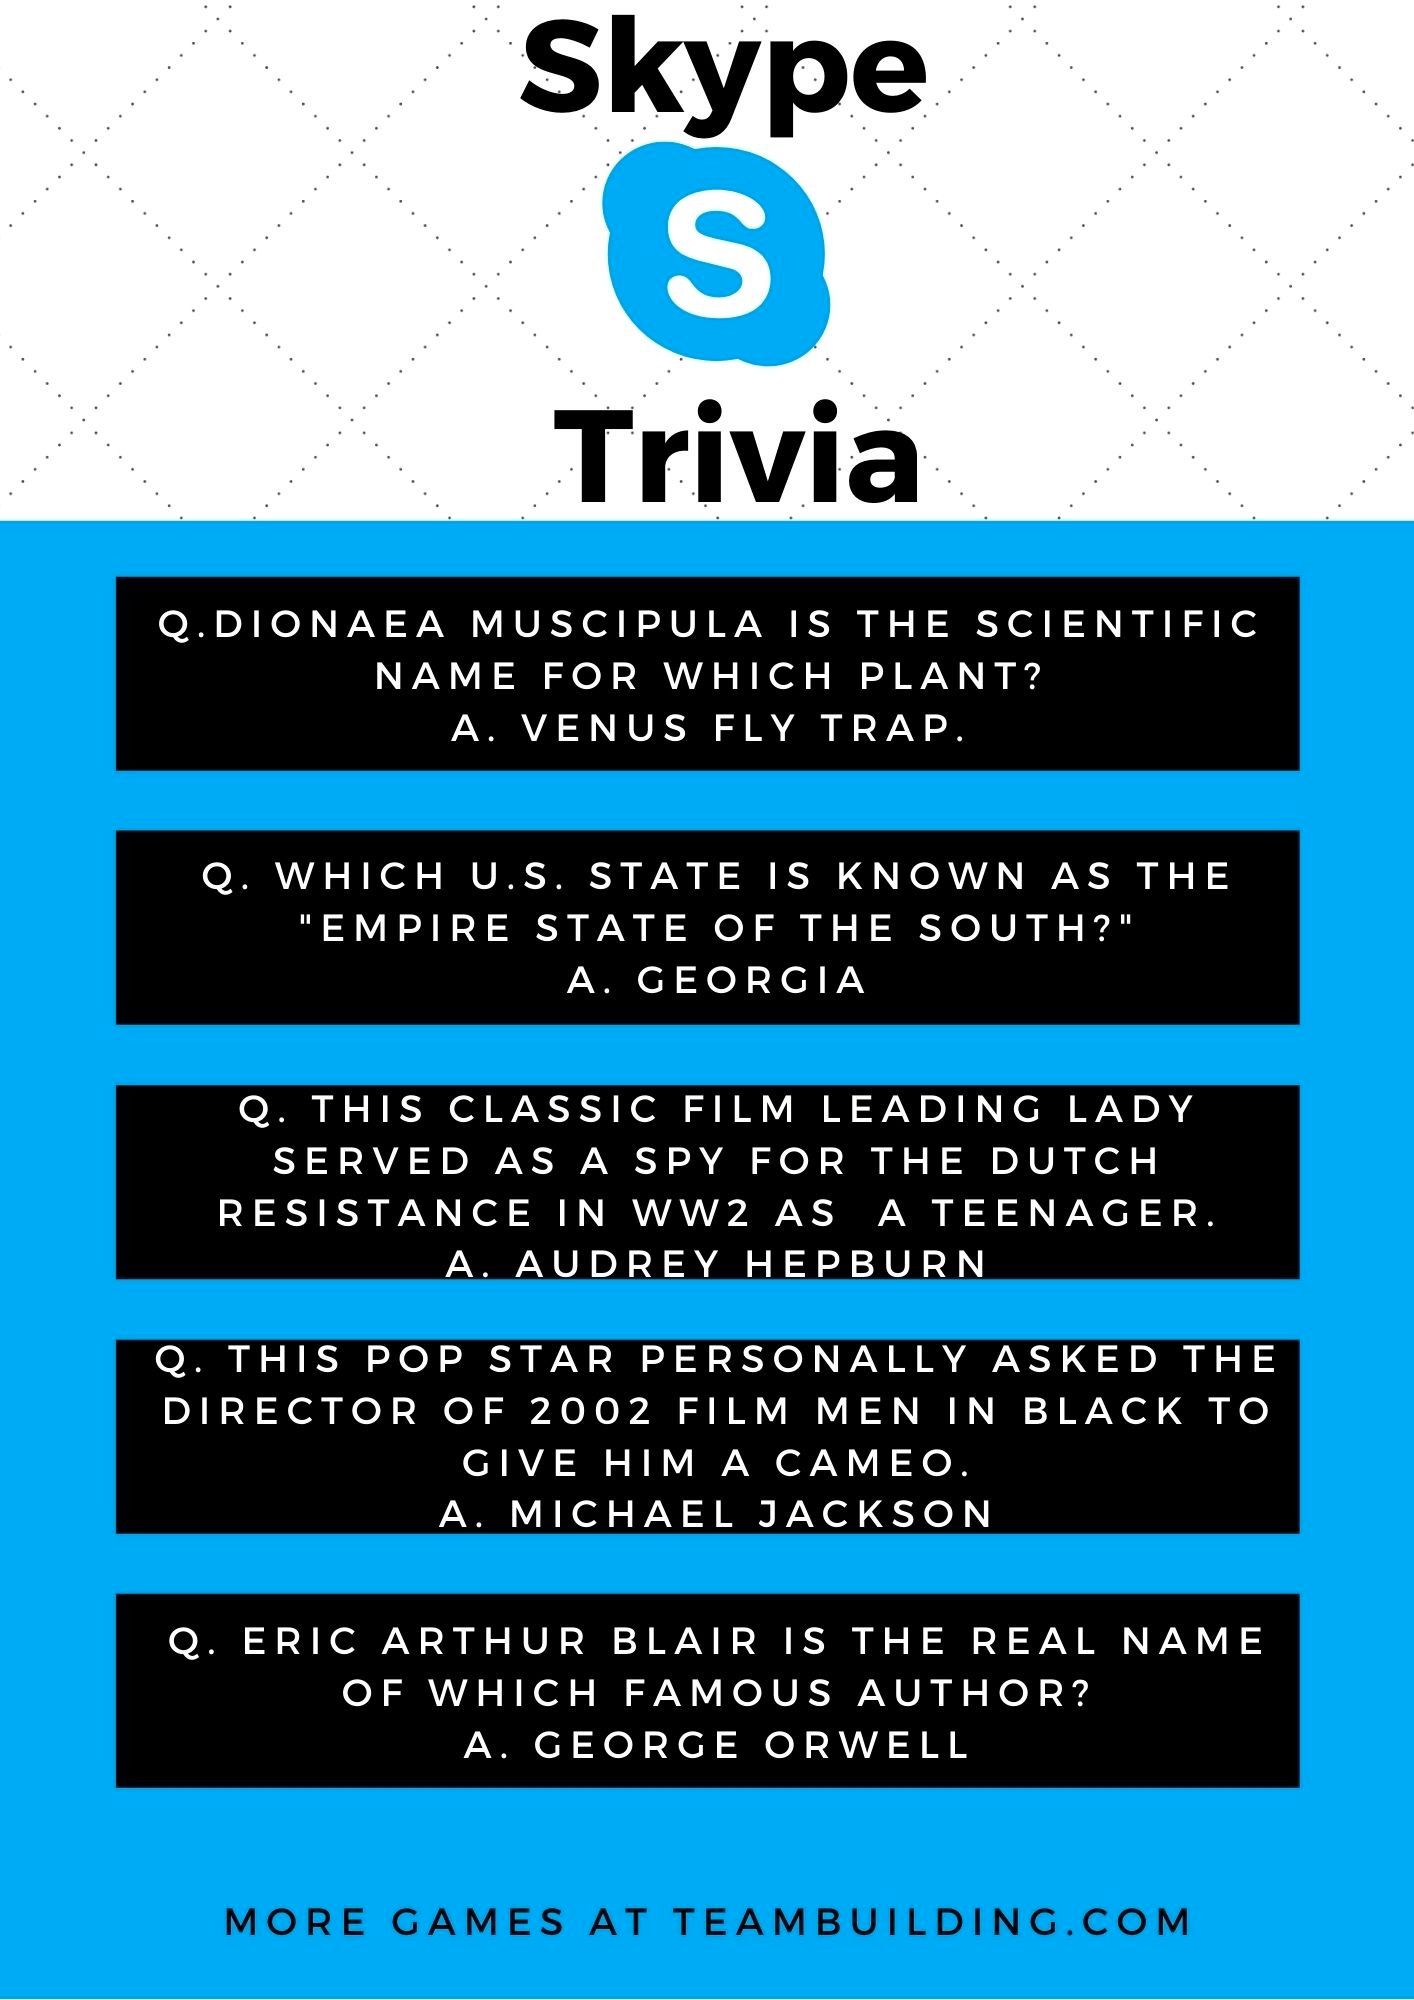 Skype Trivia Questions and Answers